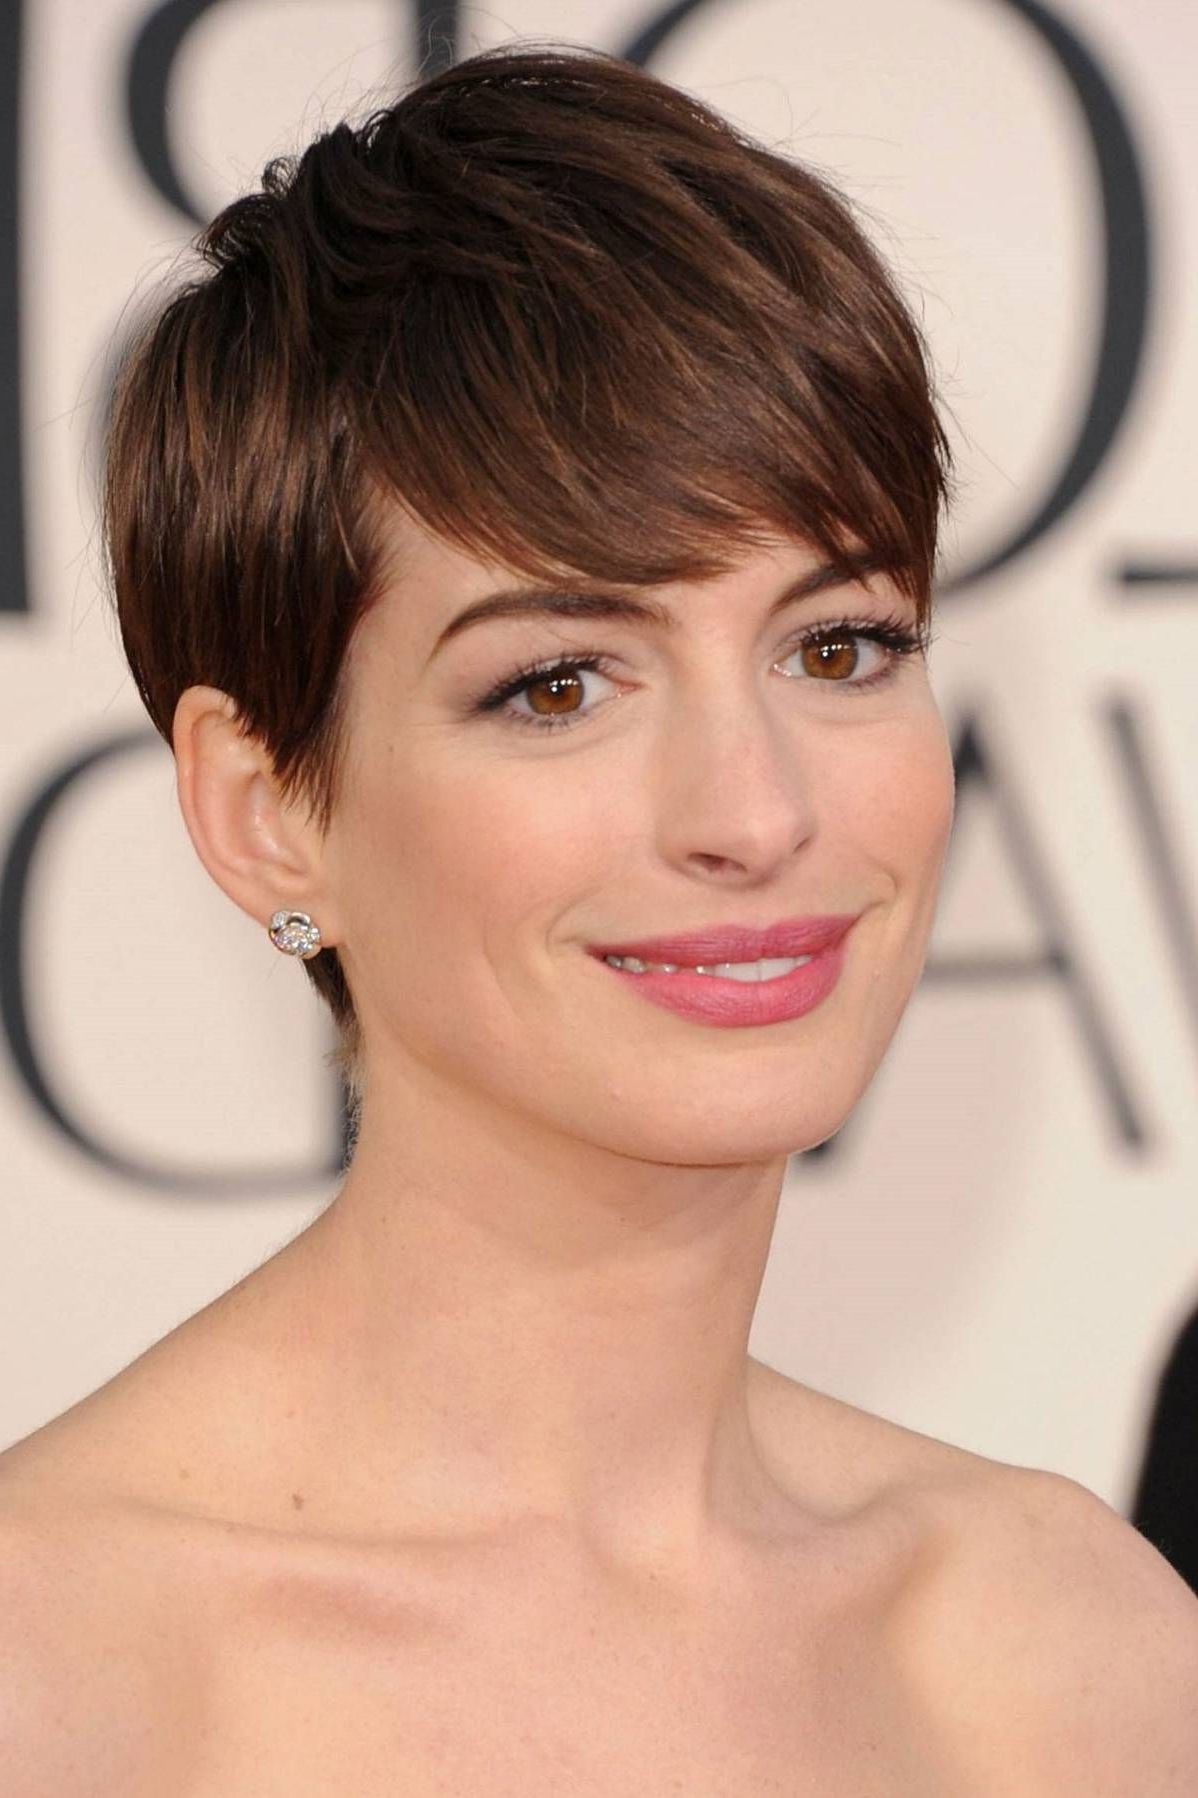 26 Of The Best Short Haircuts In History | I Need A New Haircut Pertaining To Anne Hathaway Short Hairstyles (View 24 of 25)